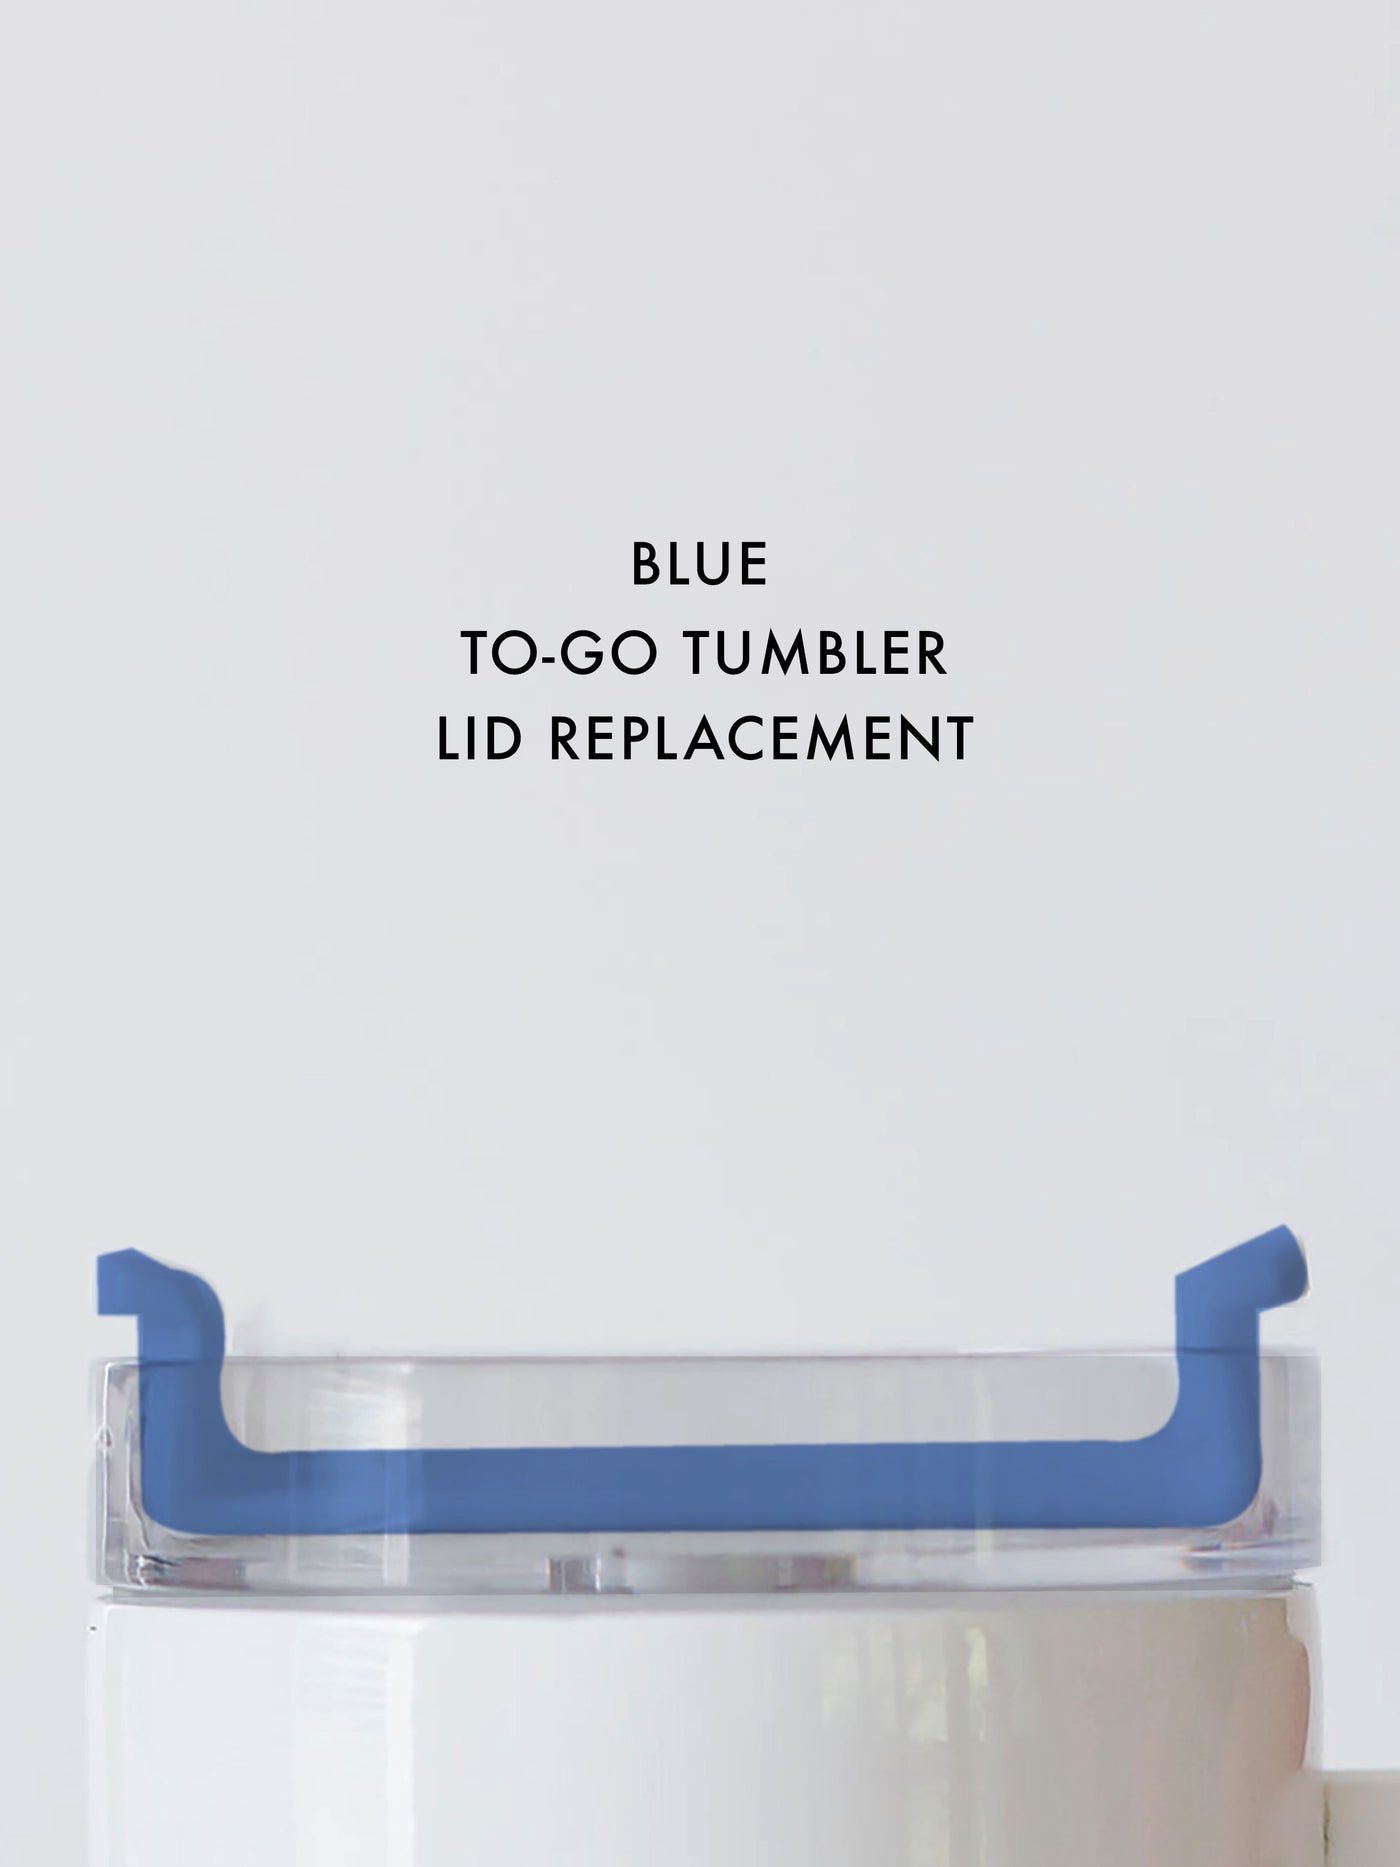 Blue To-Go Tumbler Replacement Lid - Mary Square, LLC